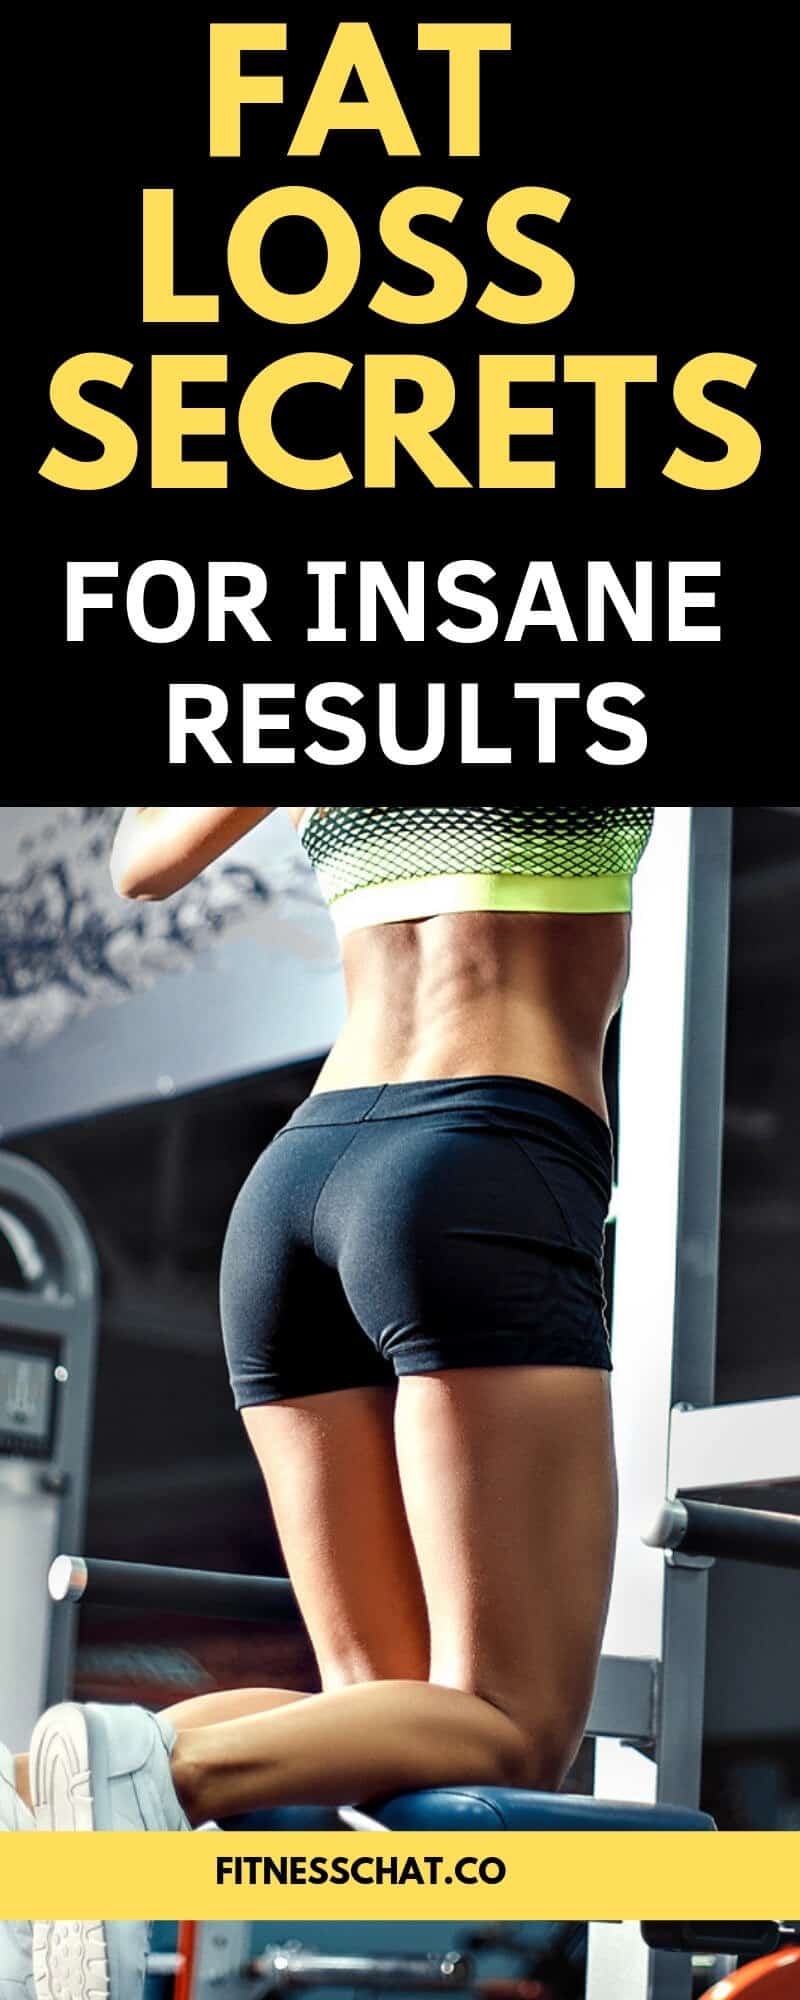 AT loss secrets for insane results 